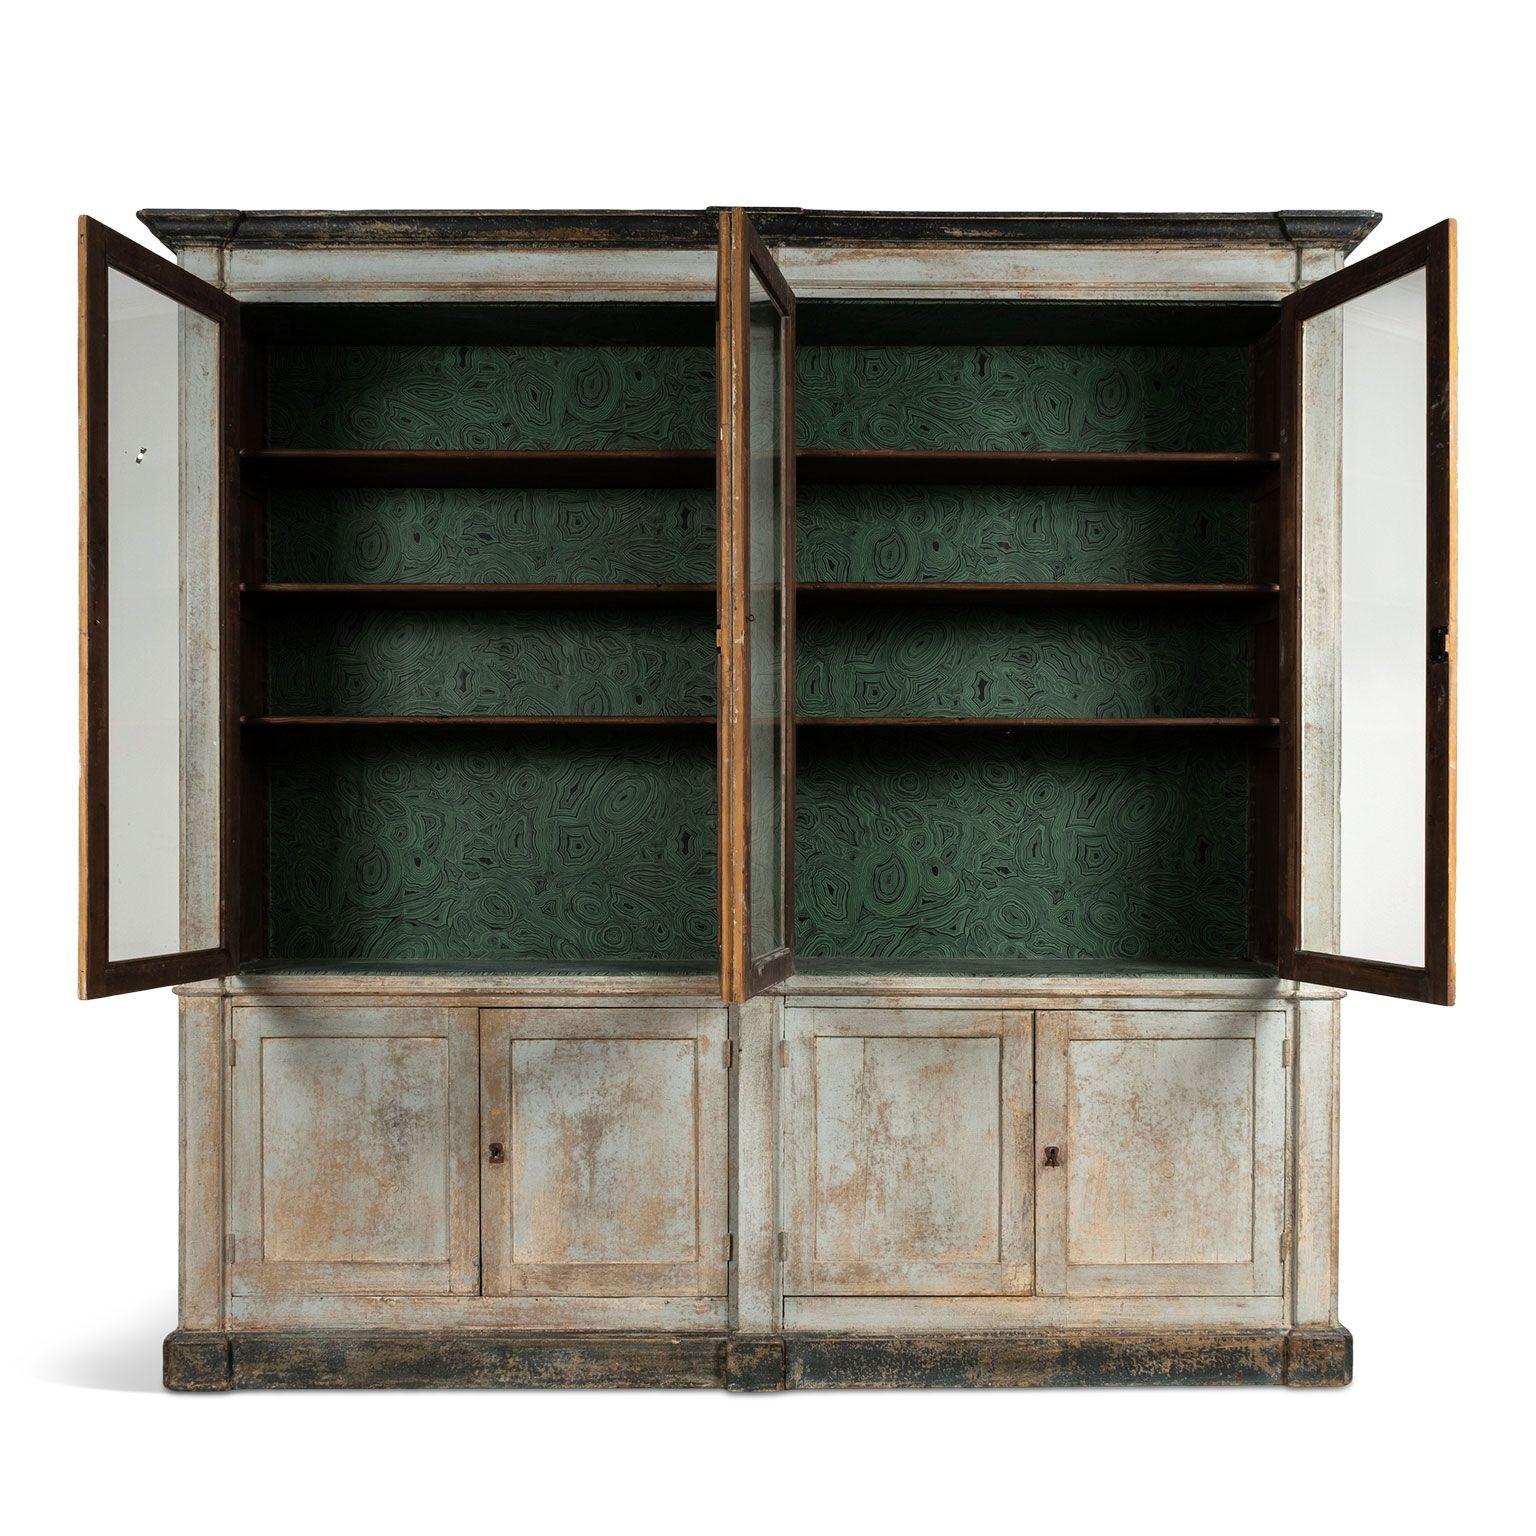 Tall painted neoclassical Italian bibliotheque with four upper glass paneled doors and four lower doors for more storage. Top portion includes adjustable shelves for display. Beautiful layers of painted finish includes losses and fading. Malachite